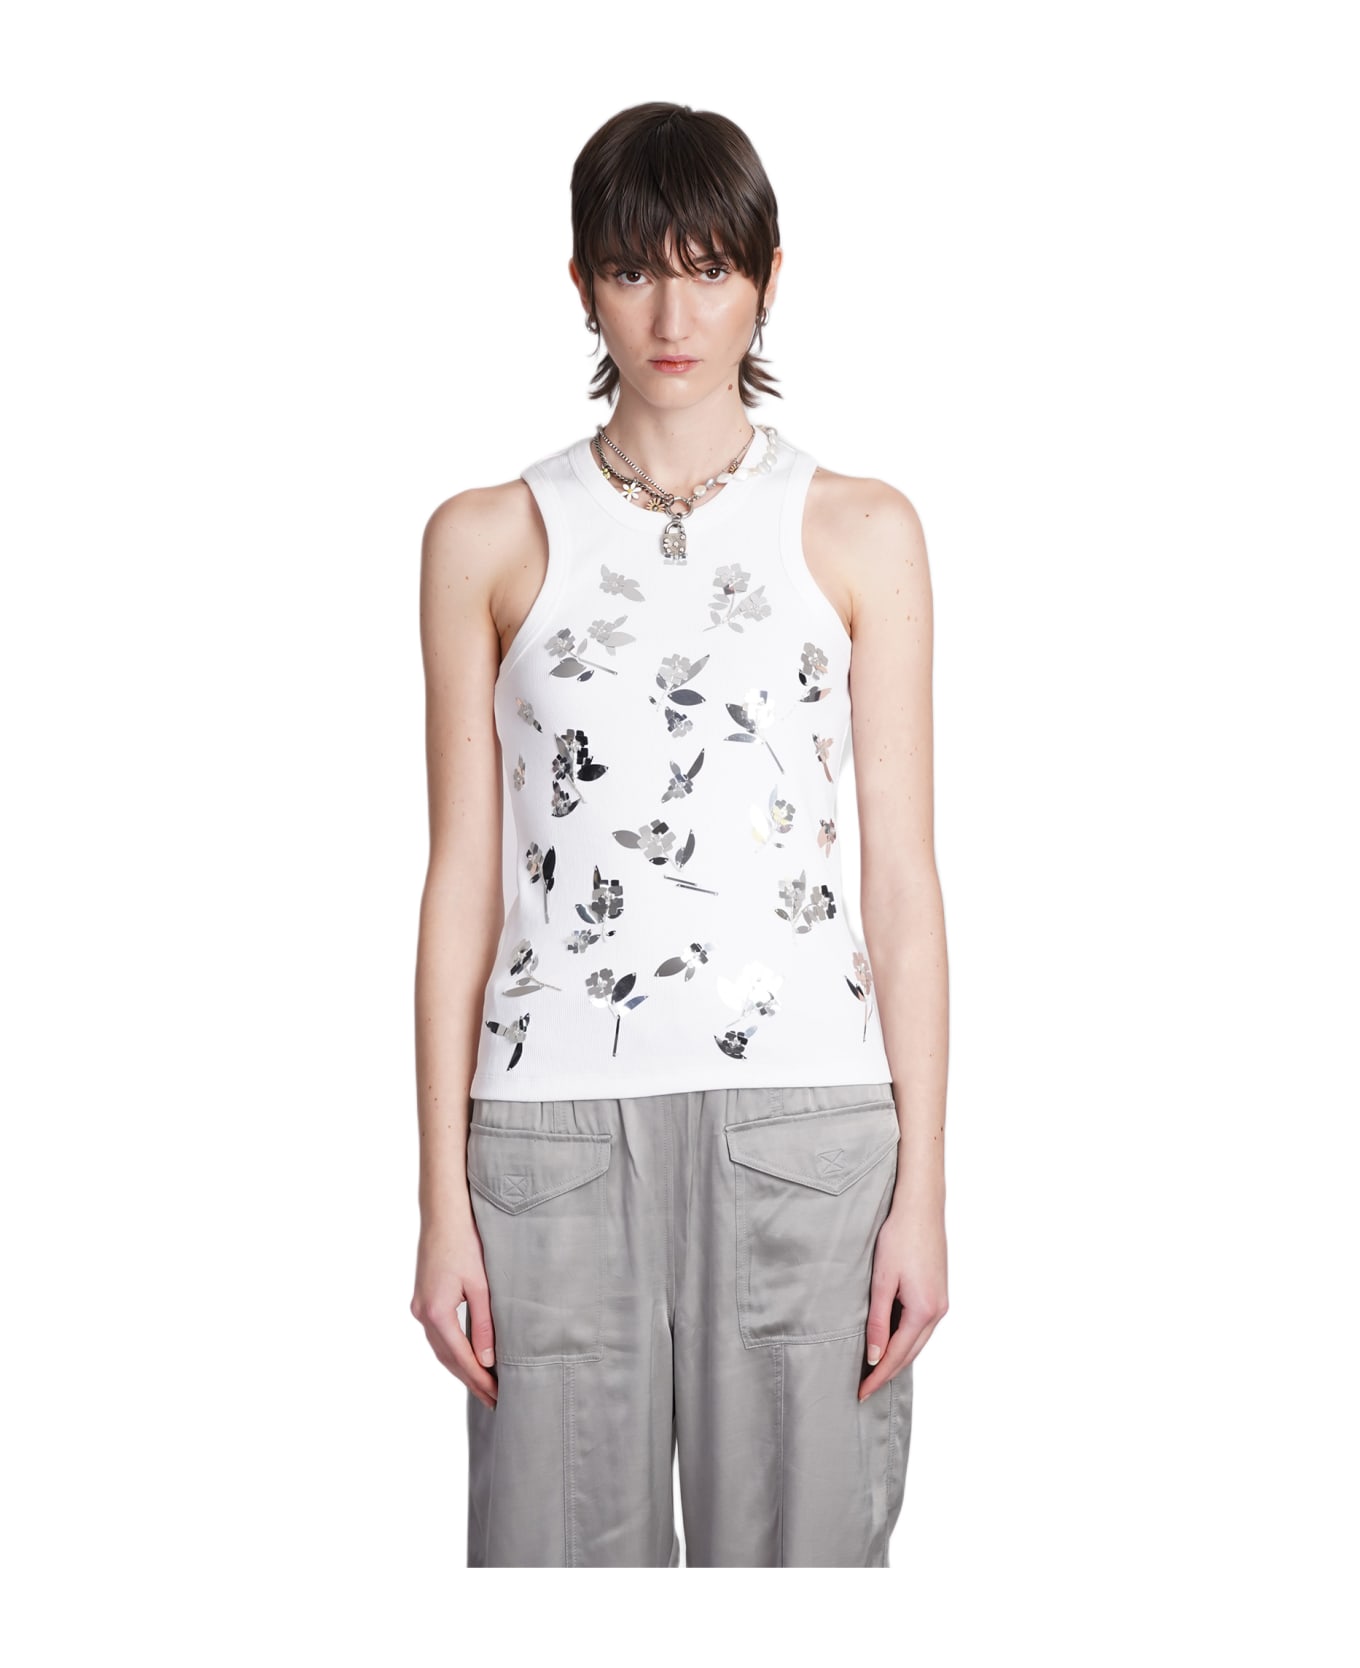 Ganni Floral Embellished Knit Tank Top - Bright White トップス